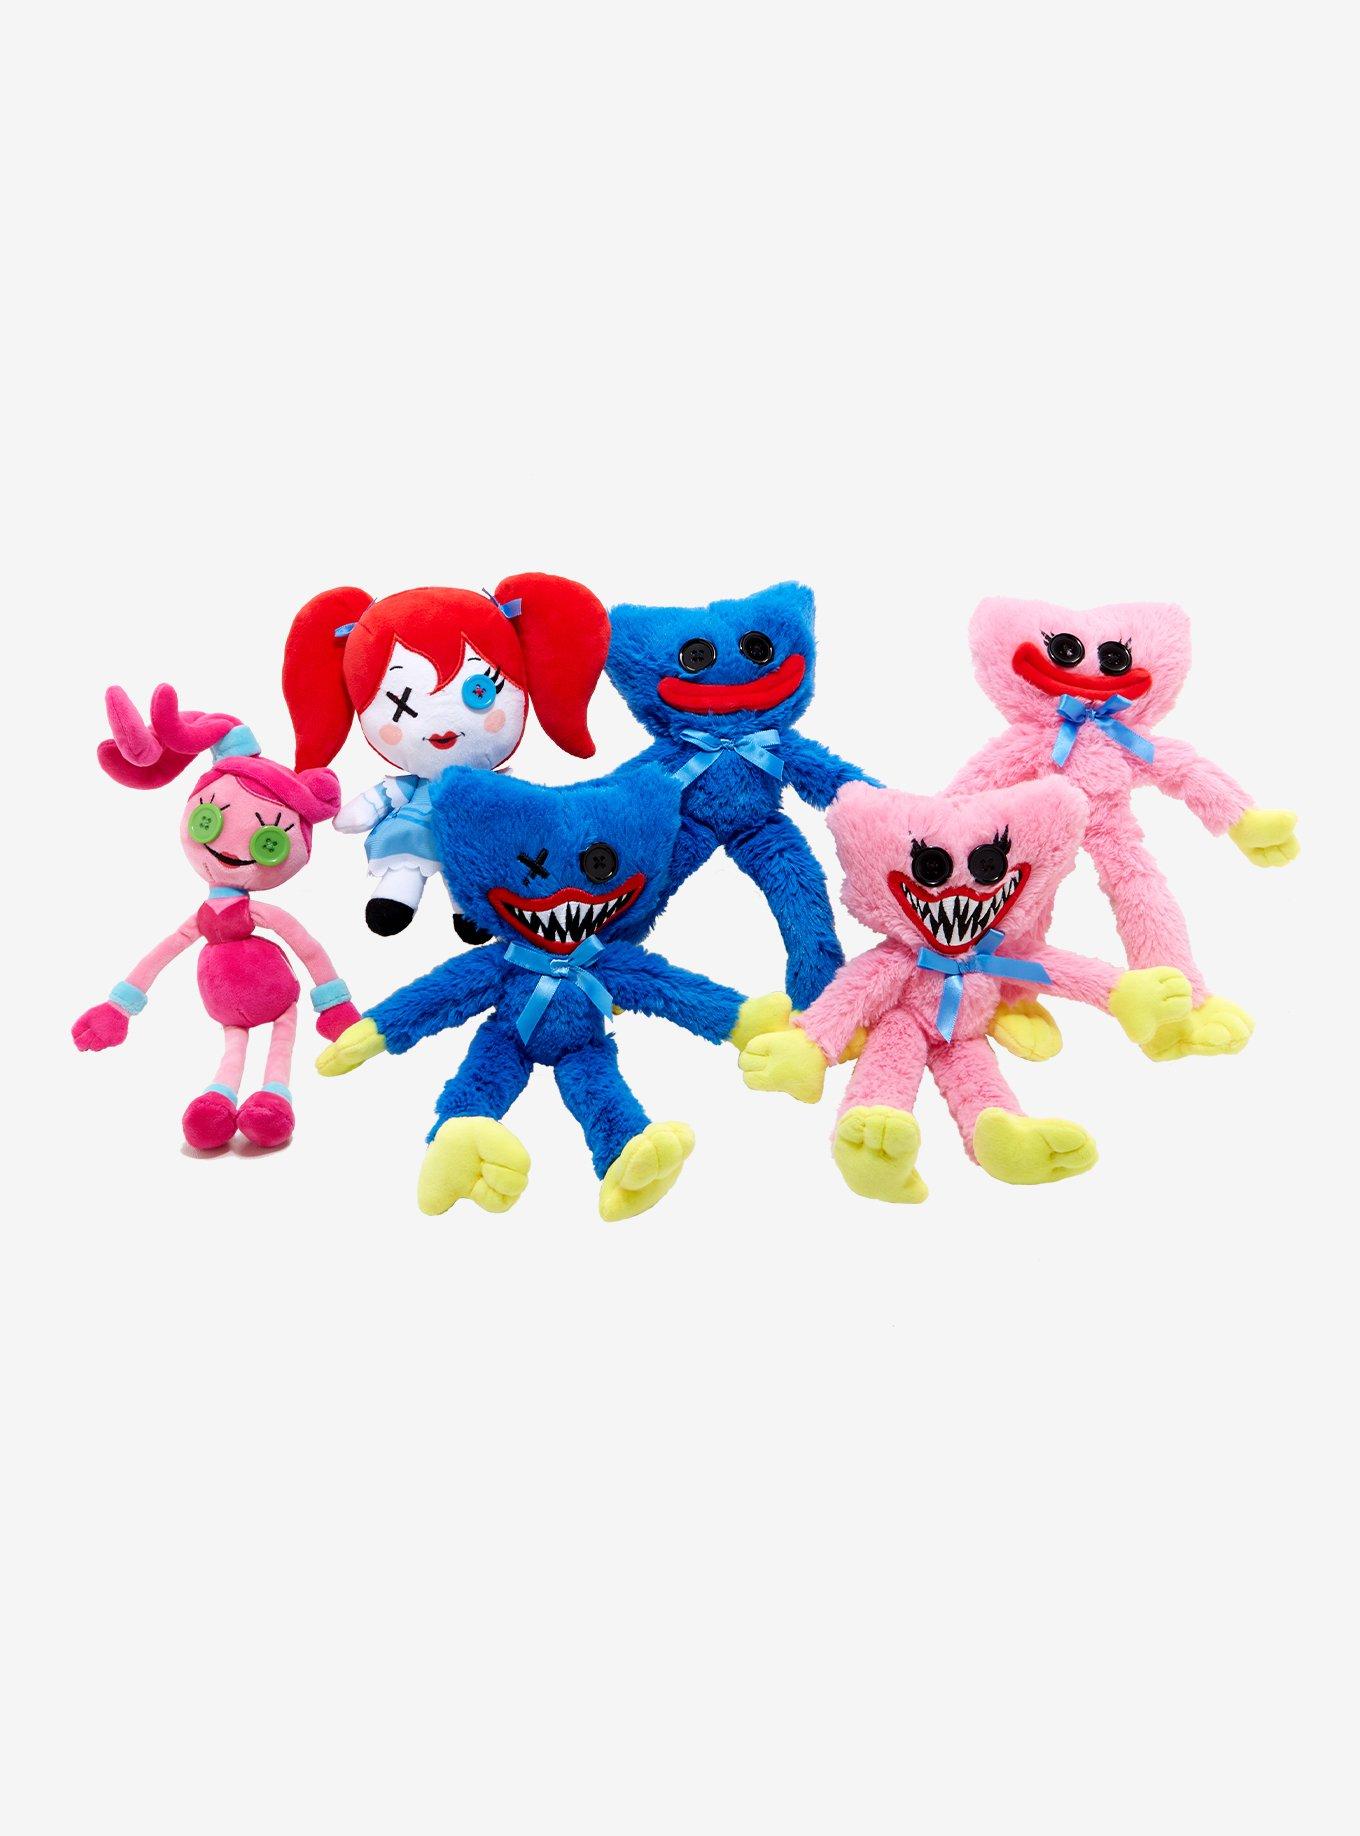 Poppy Playtime Characters As Plushies Part 1!!! 